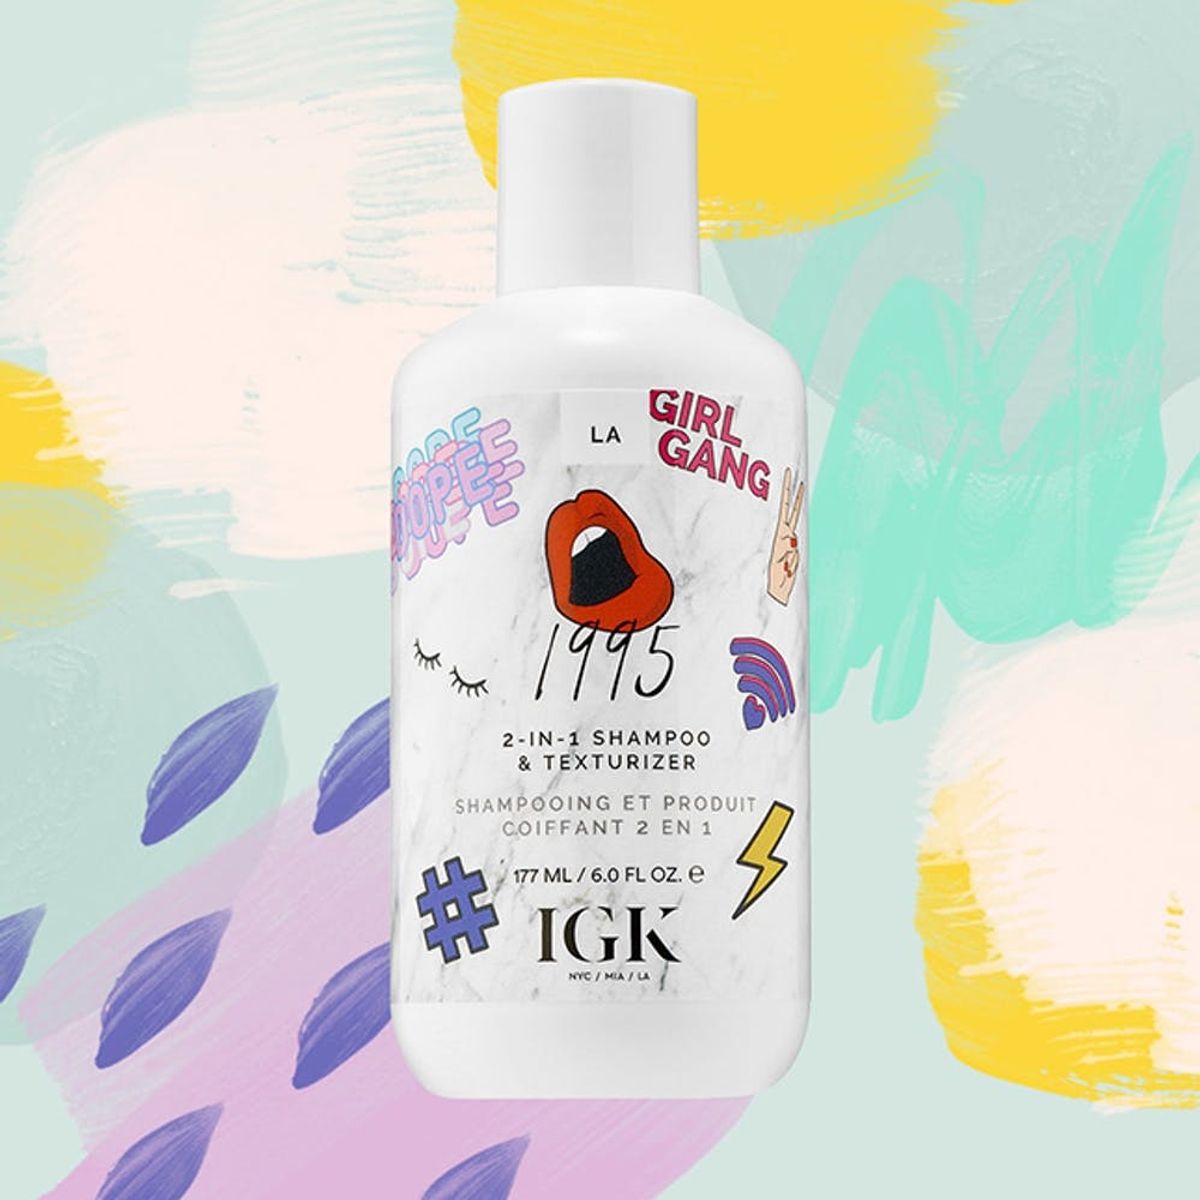 This New Shampoo Makes Your Hair Dirty — But in a Good Way